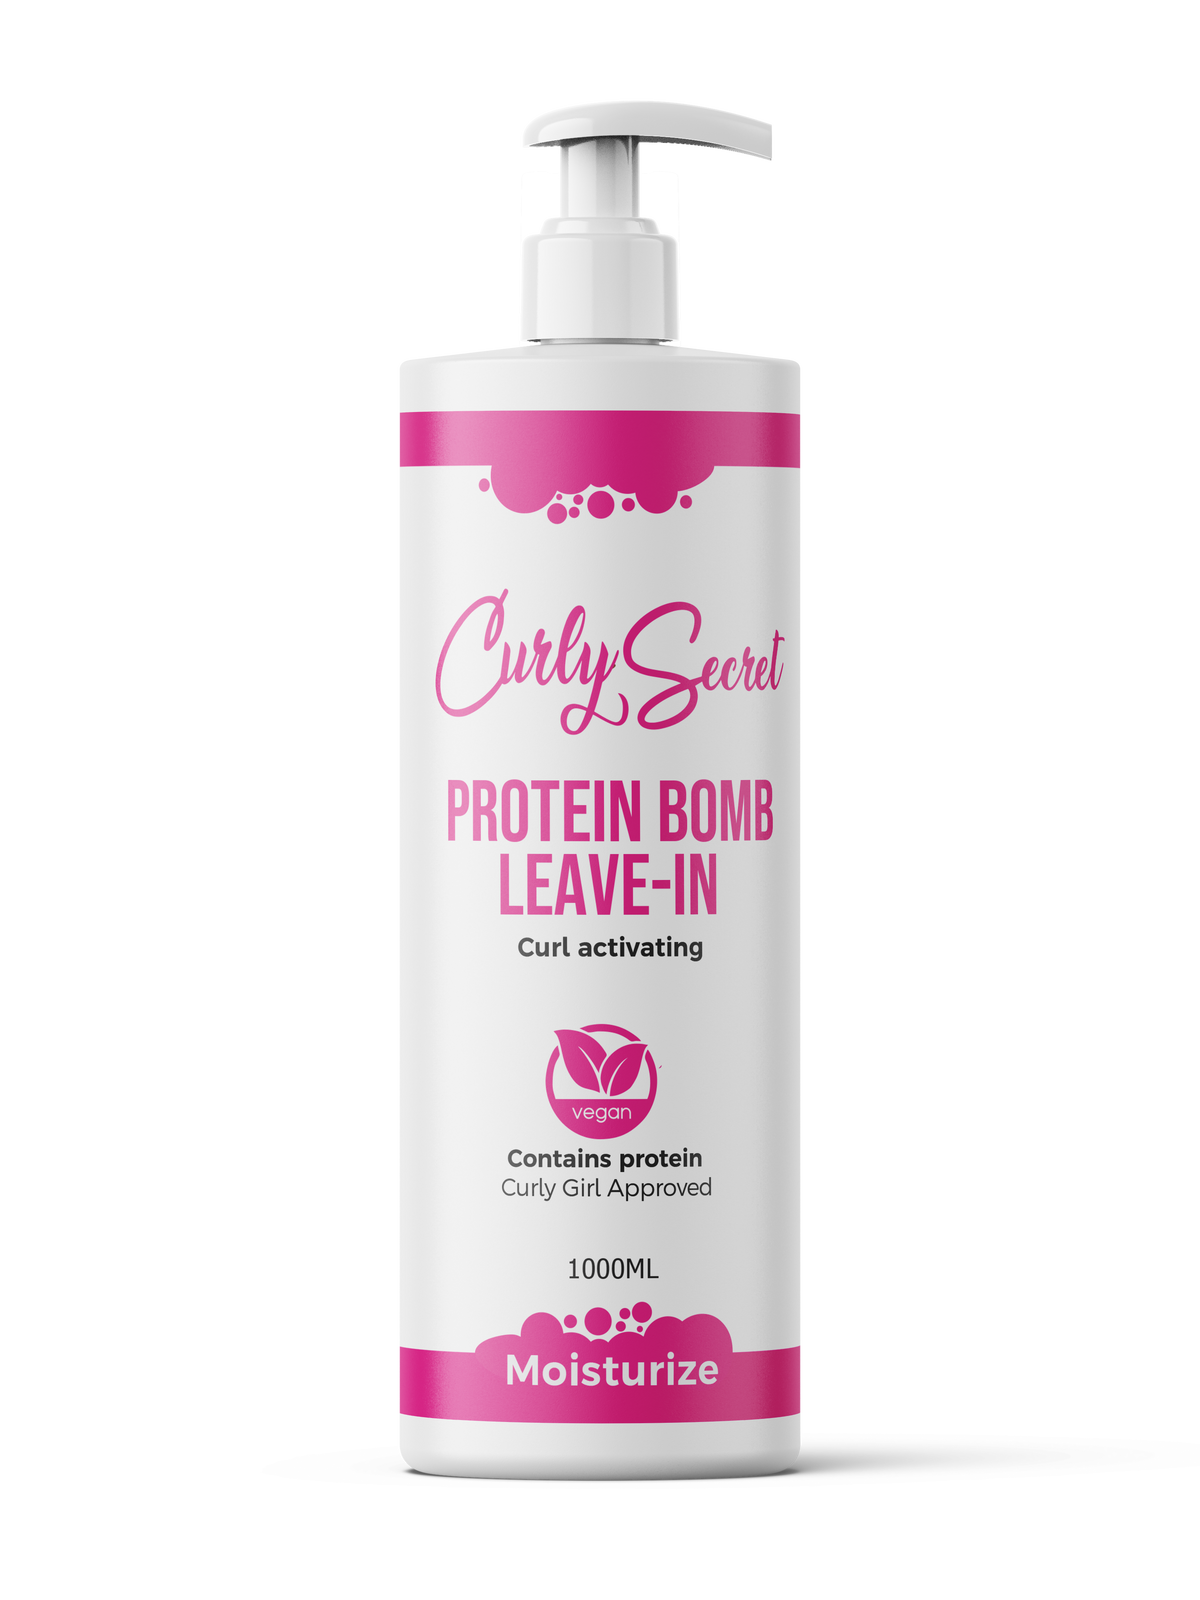 Protein Bomb Leave-in